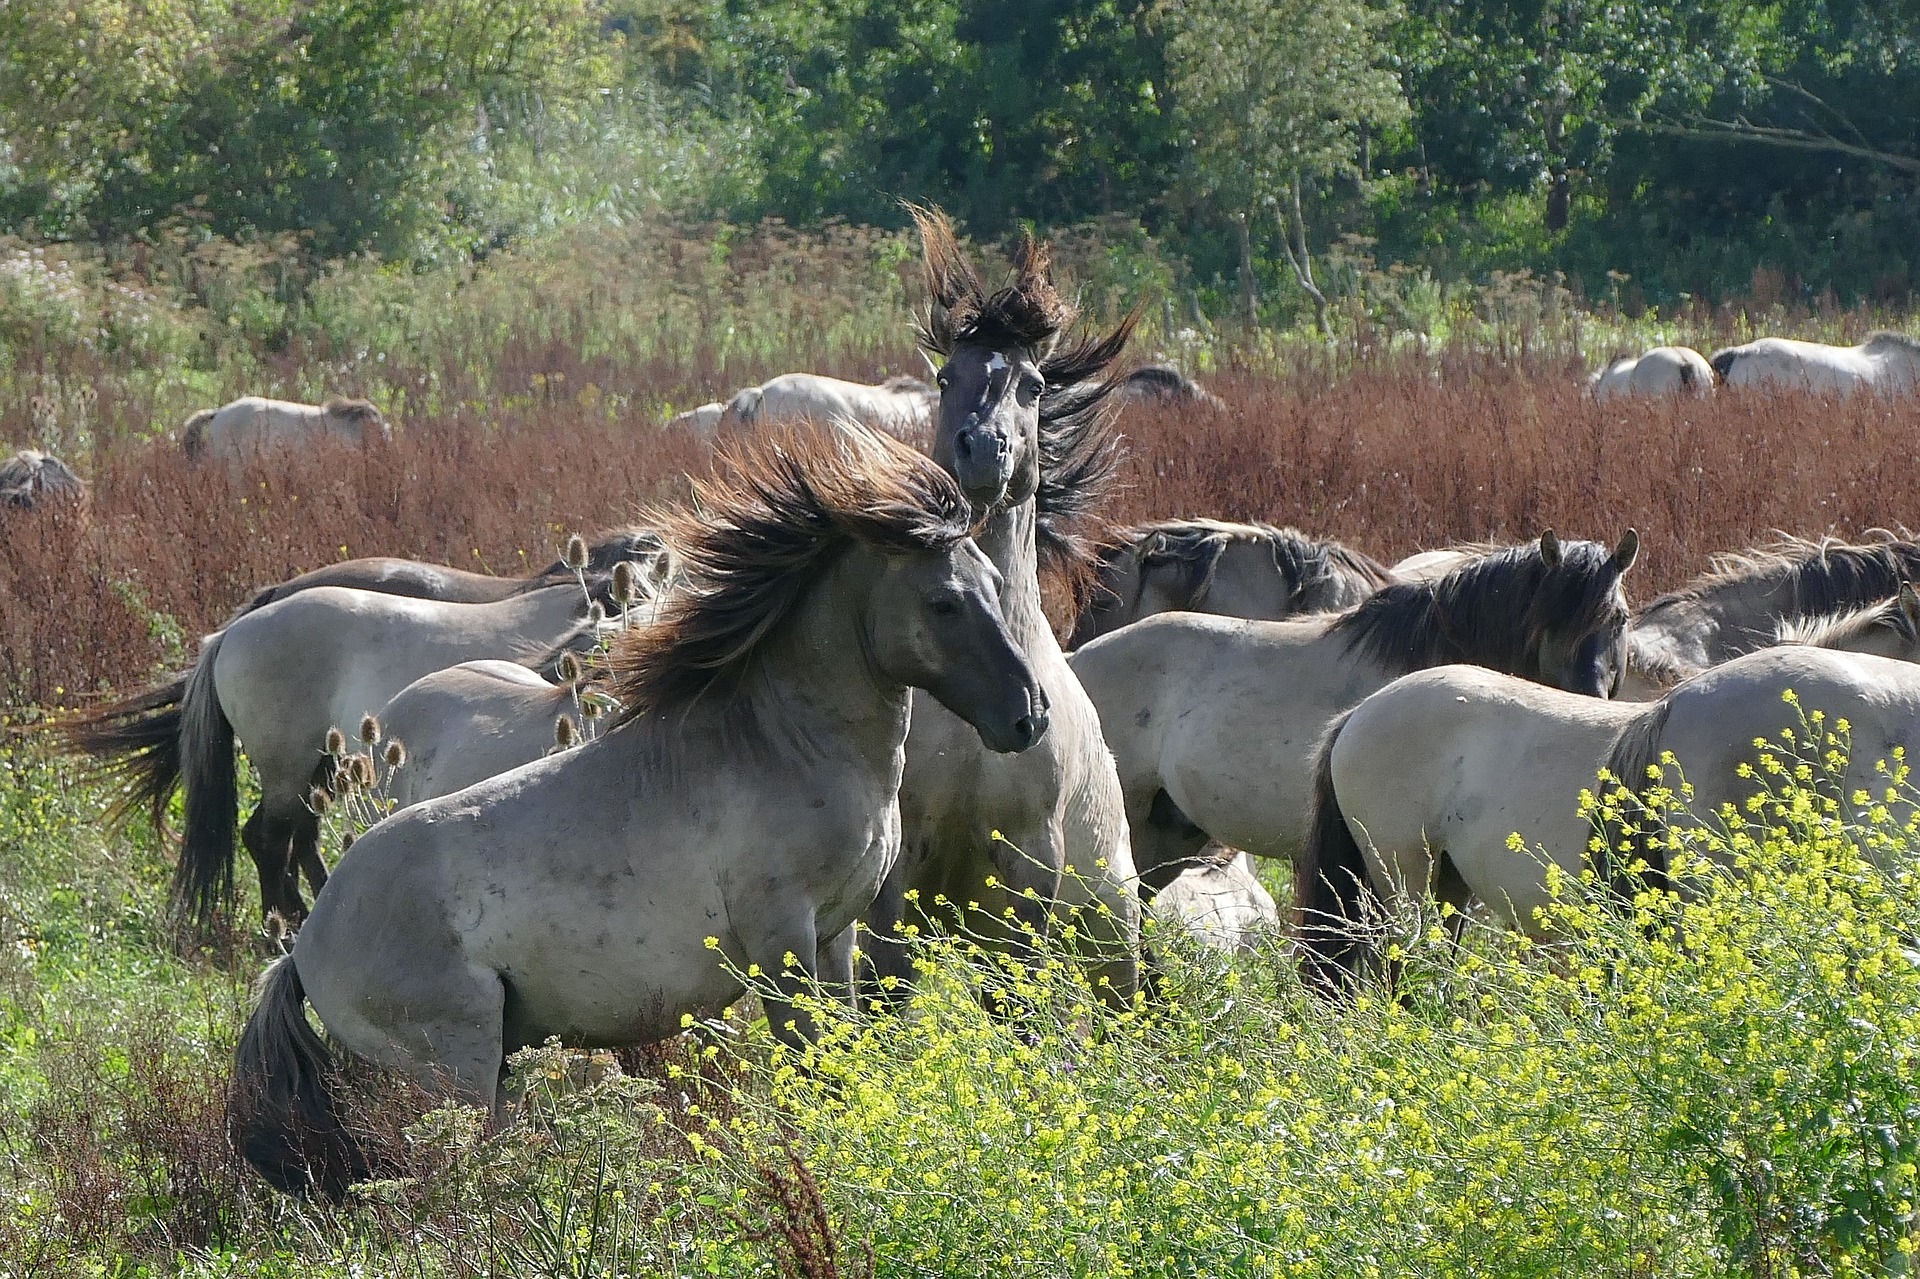 Group Of Beautiful Wild Horse Wallpaper Free Download - Nature And Wild Animal - HD Wallpaper 